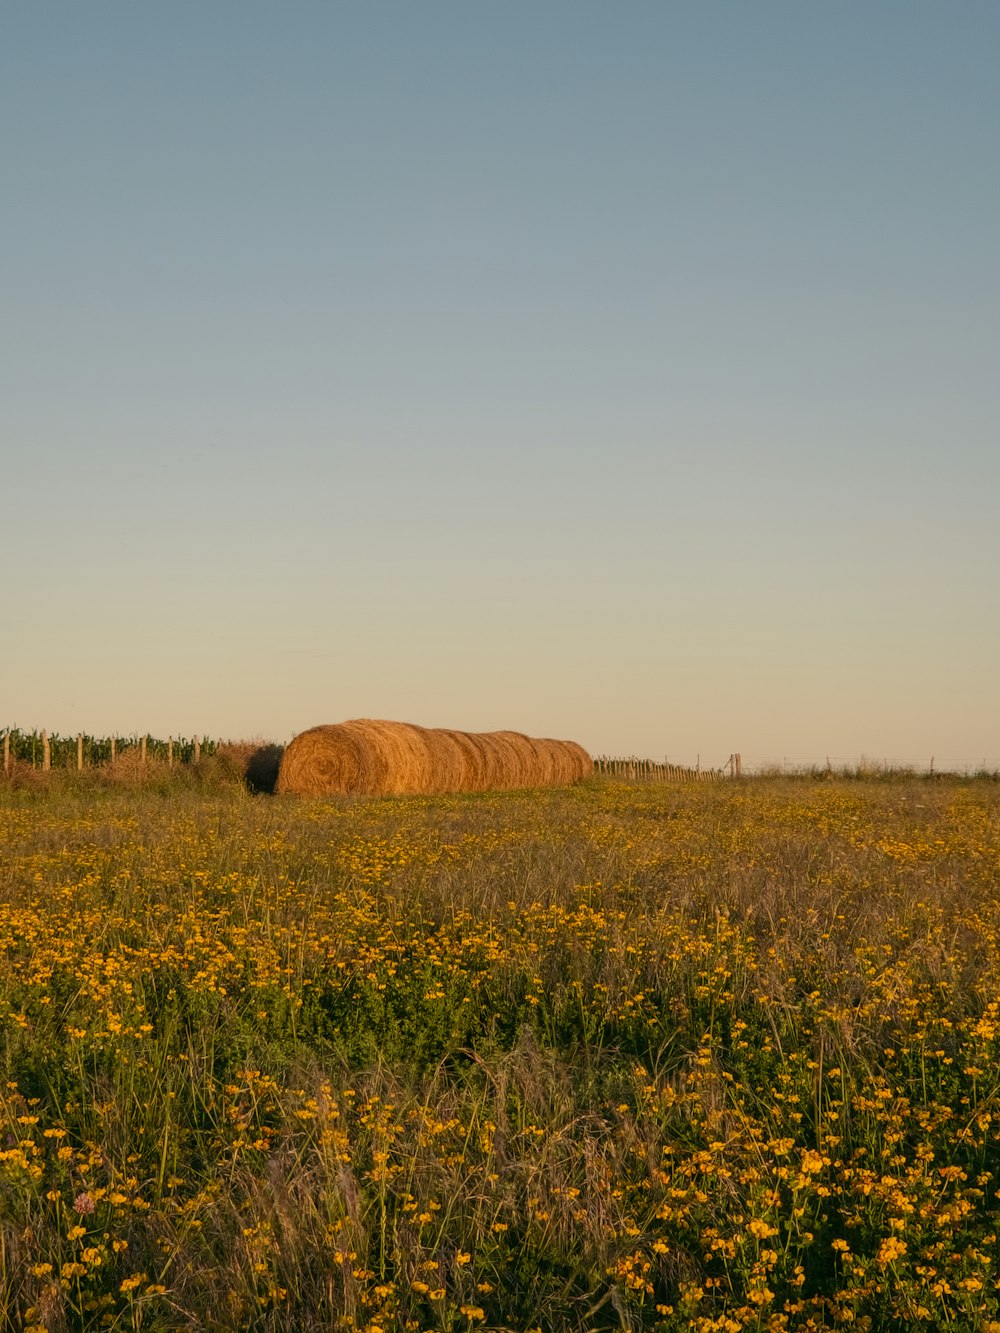 a large hay bale in a field of flowers